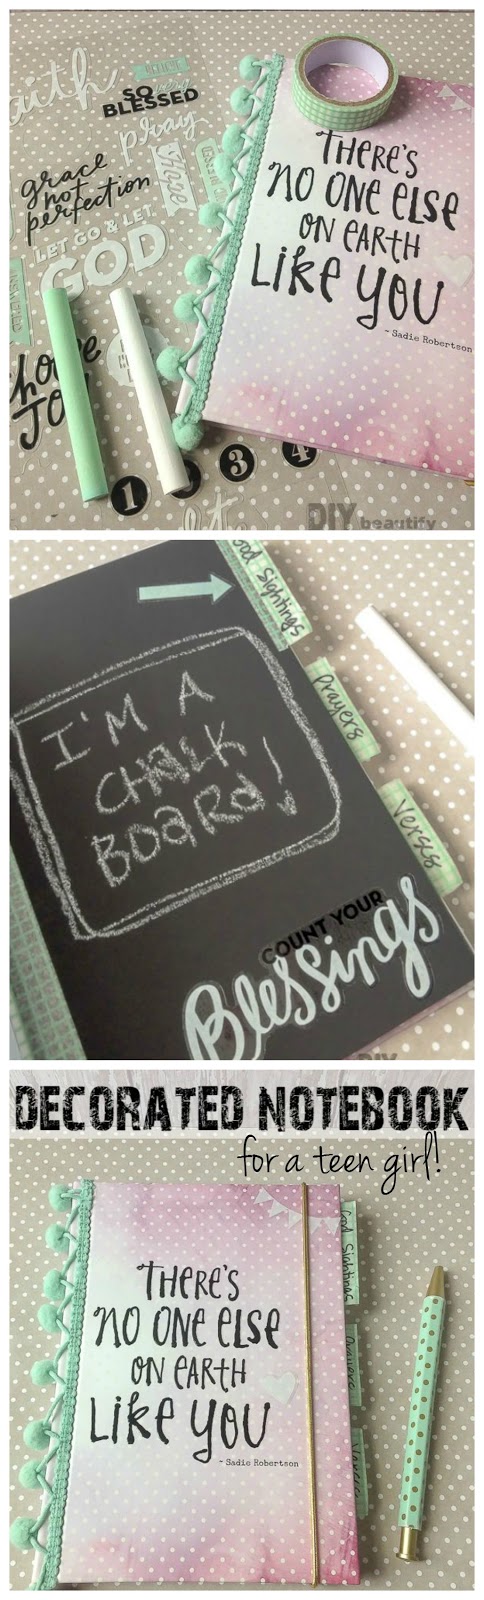 A decorated notebook makes a great gift for a teen girl! Use trims, stickers and chalkboard paper! See more at DIY beautify